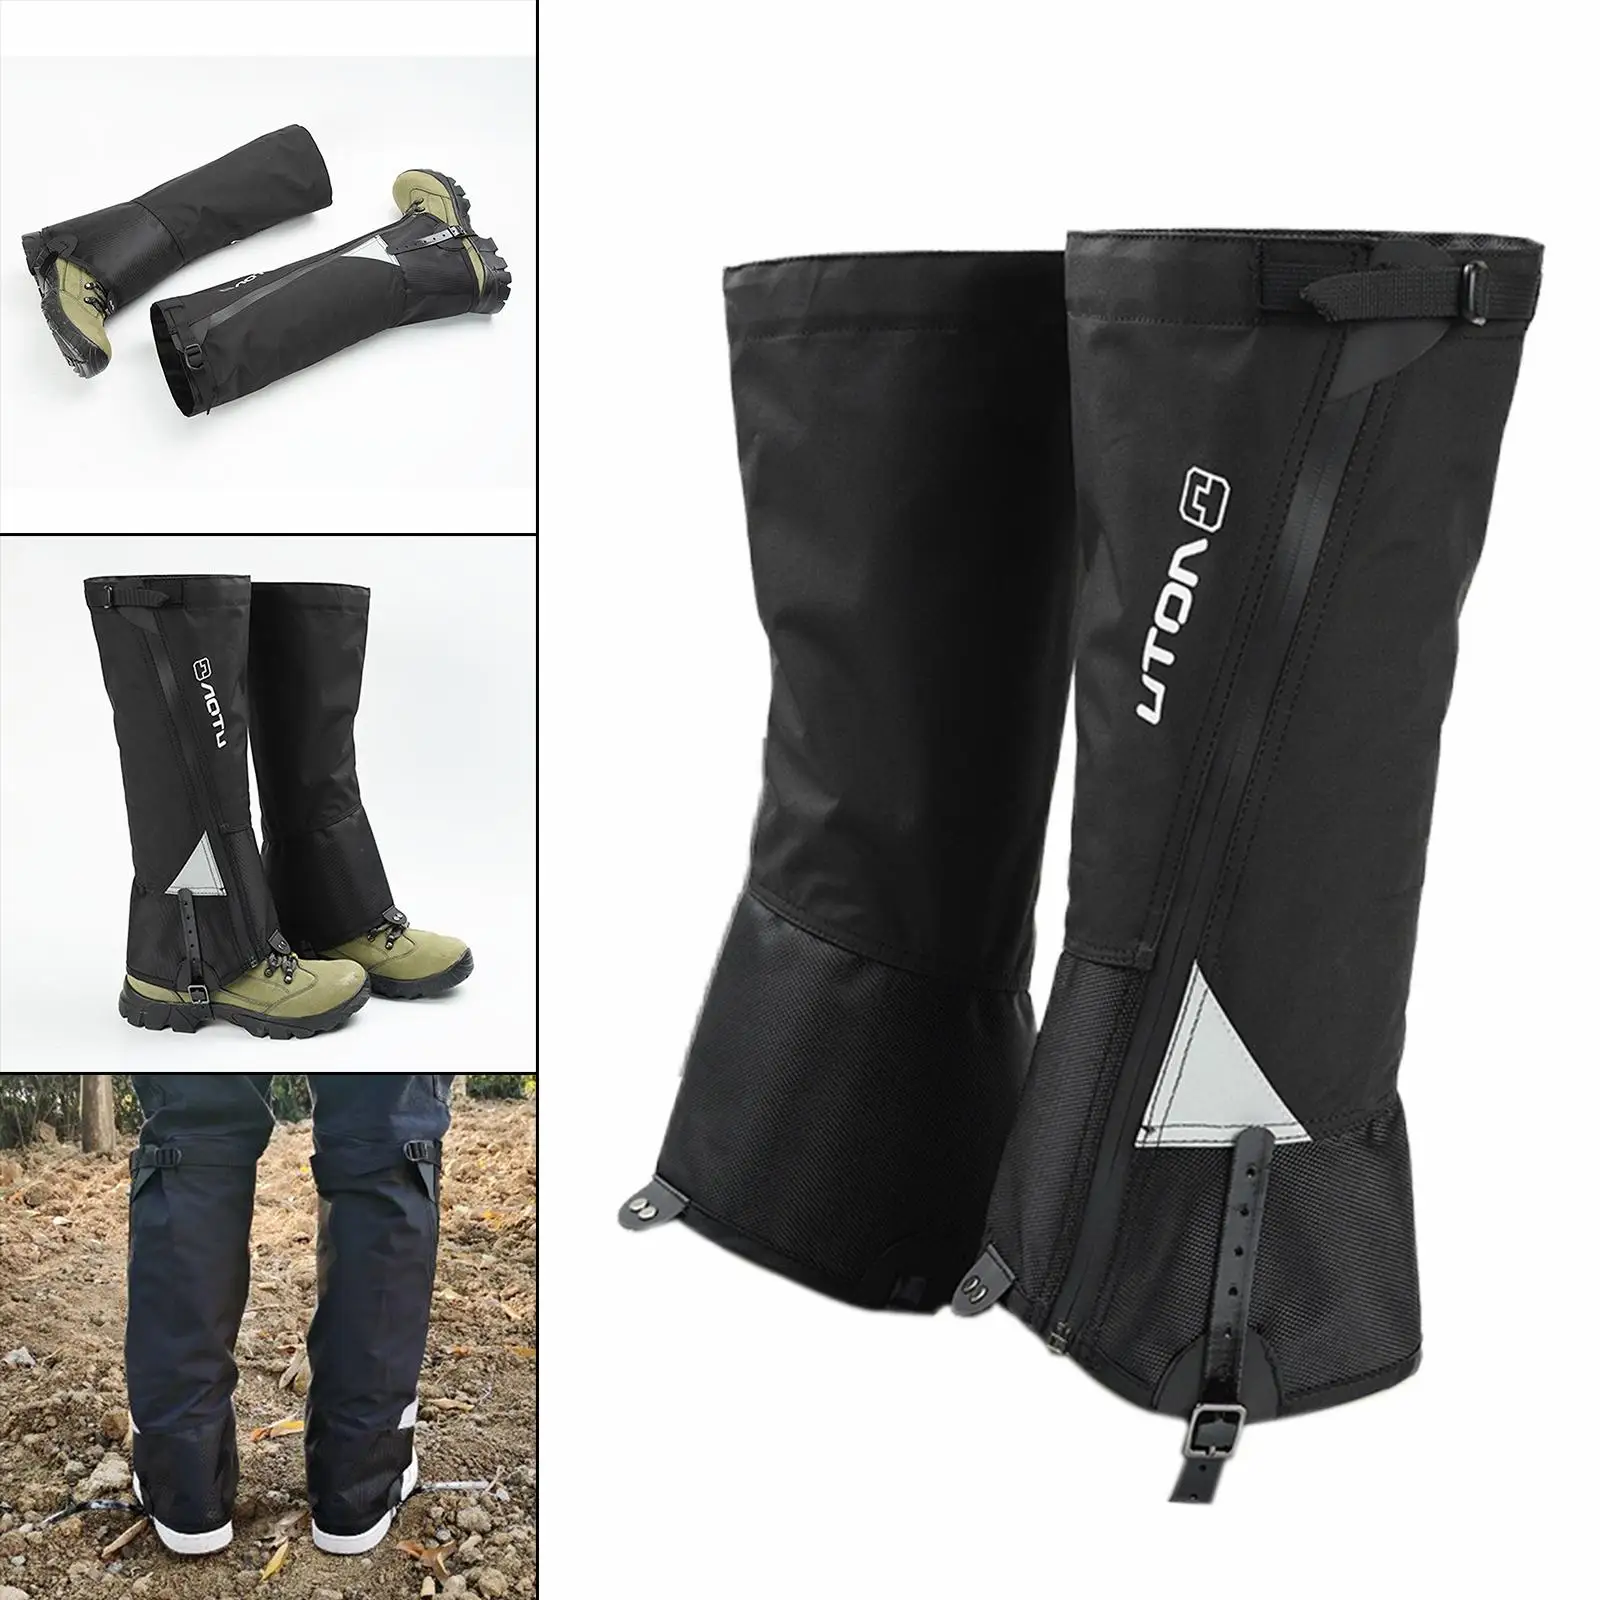 Adjustable Leg Gaiters Waterproof Durable Shoes Covers for Hiking Outdoor Sports